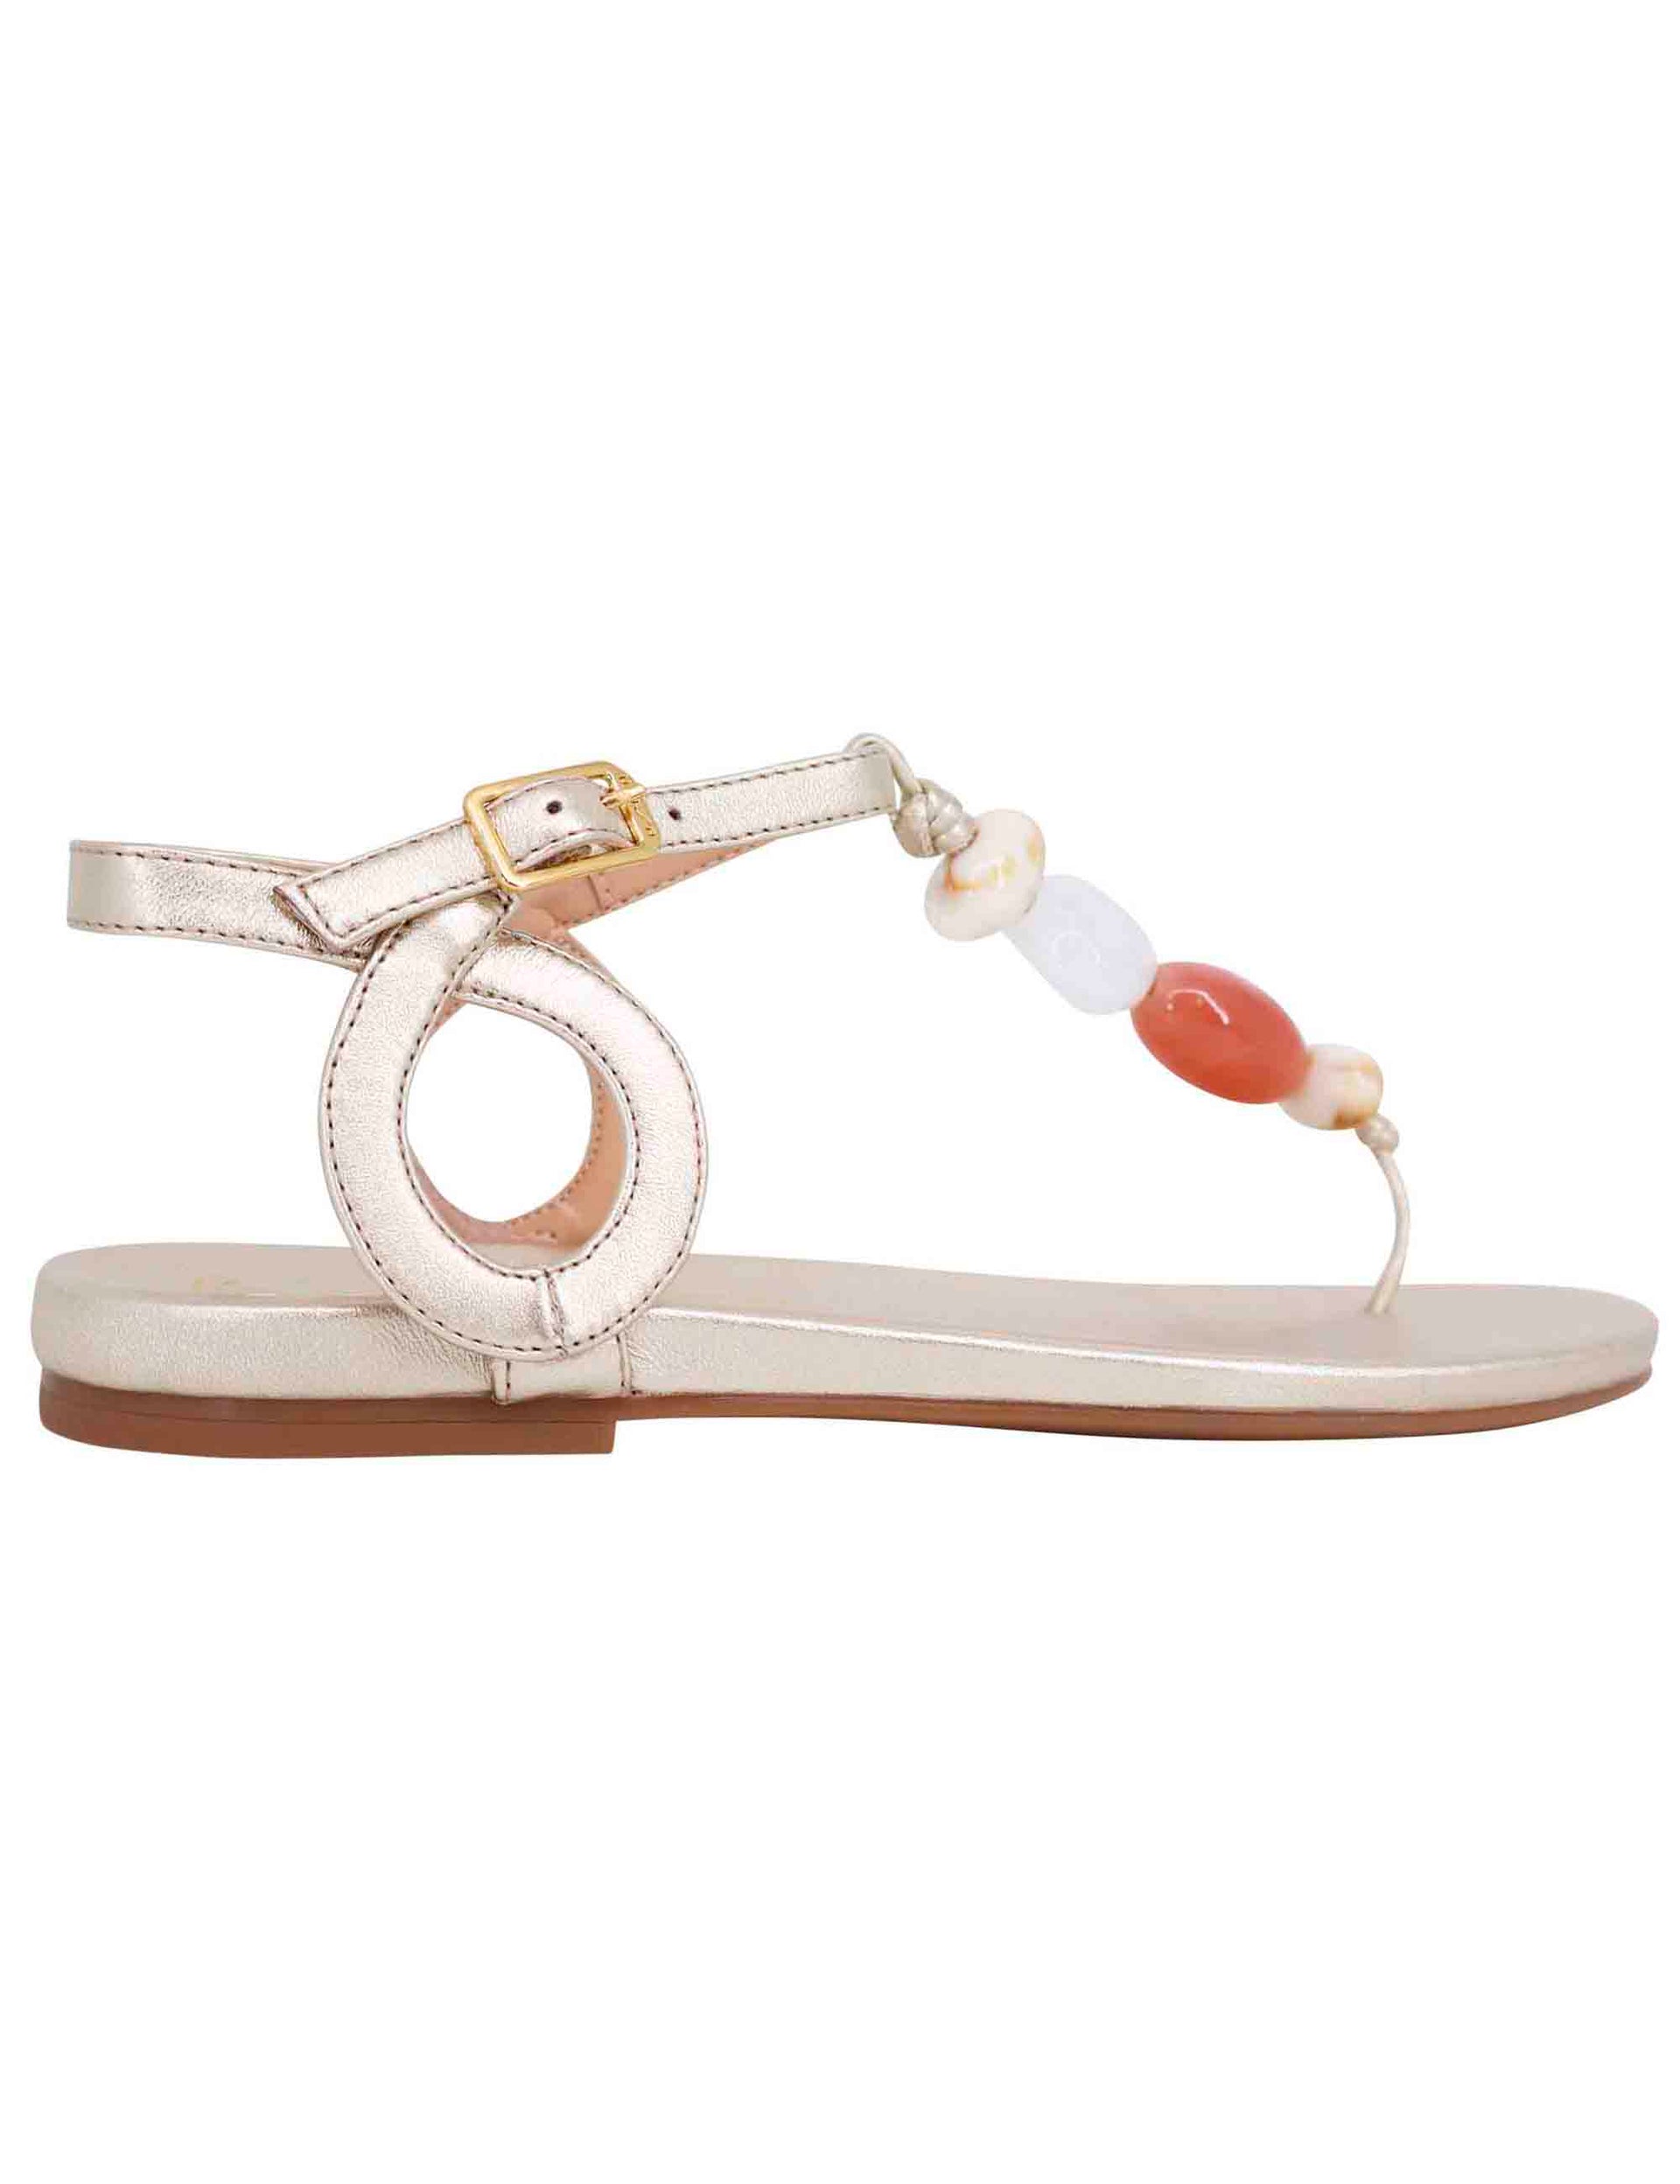 Women's platinum leather thong sandals with ankle strap